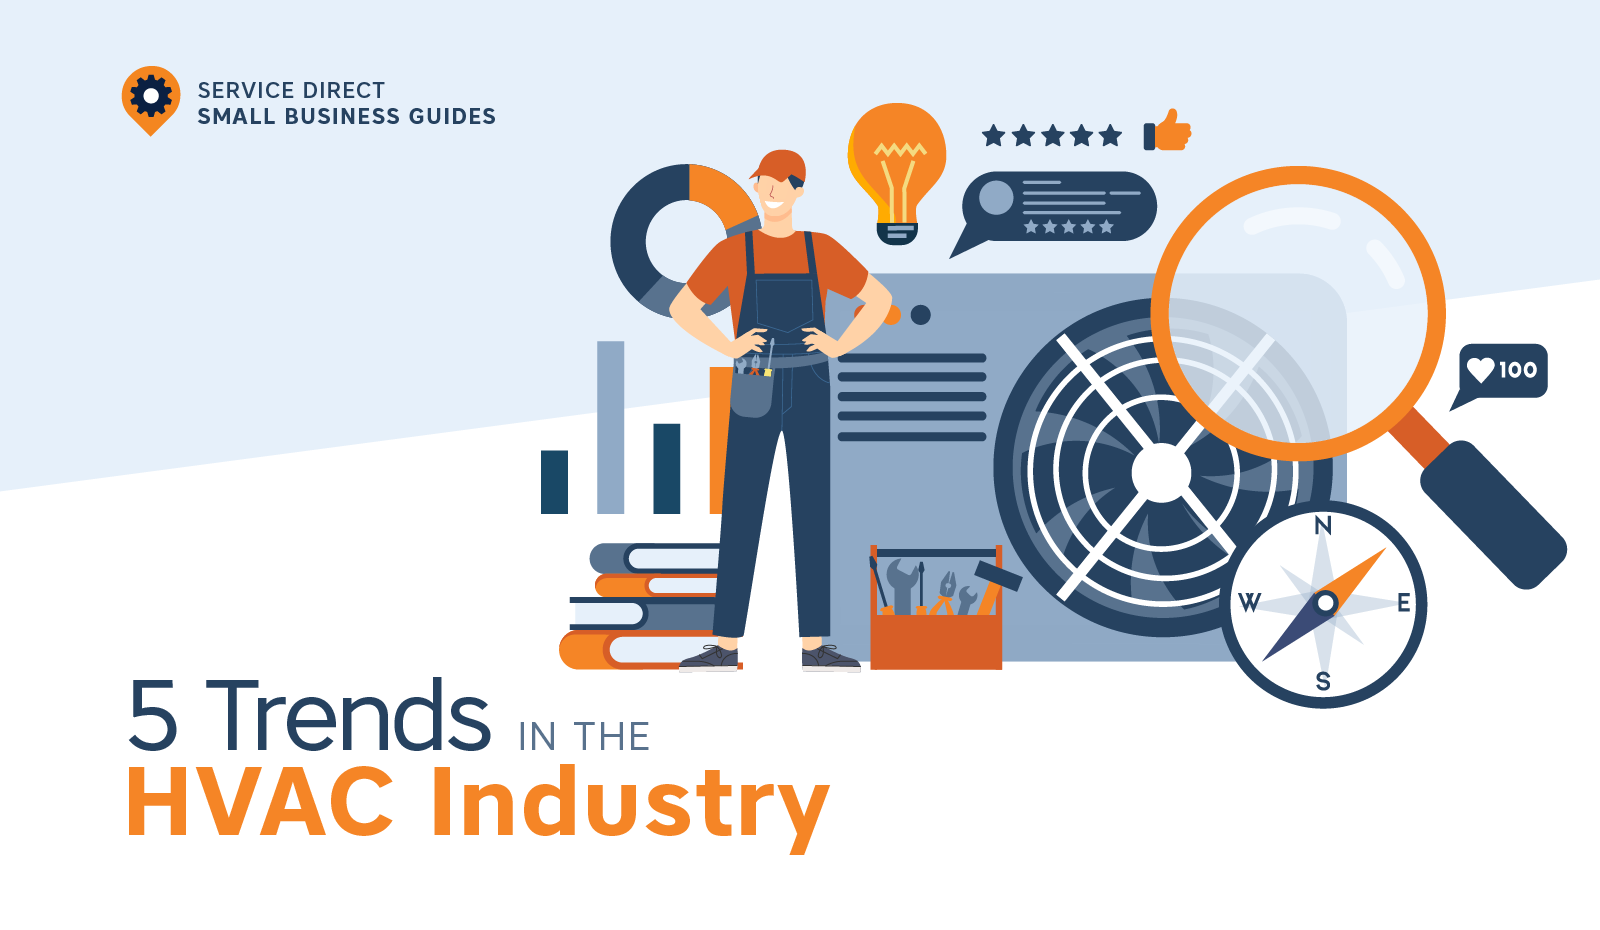 5 Top Trends in the HVAC Industry You Need to Know